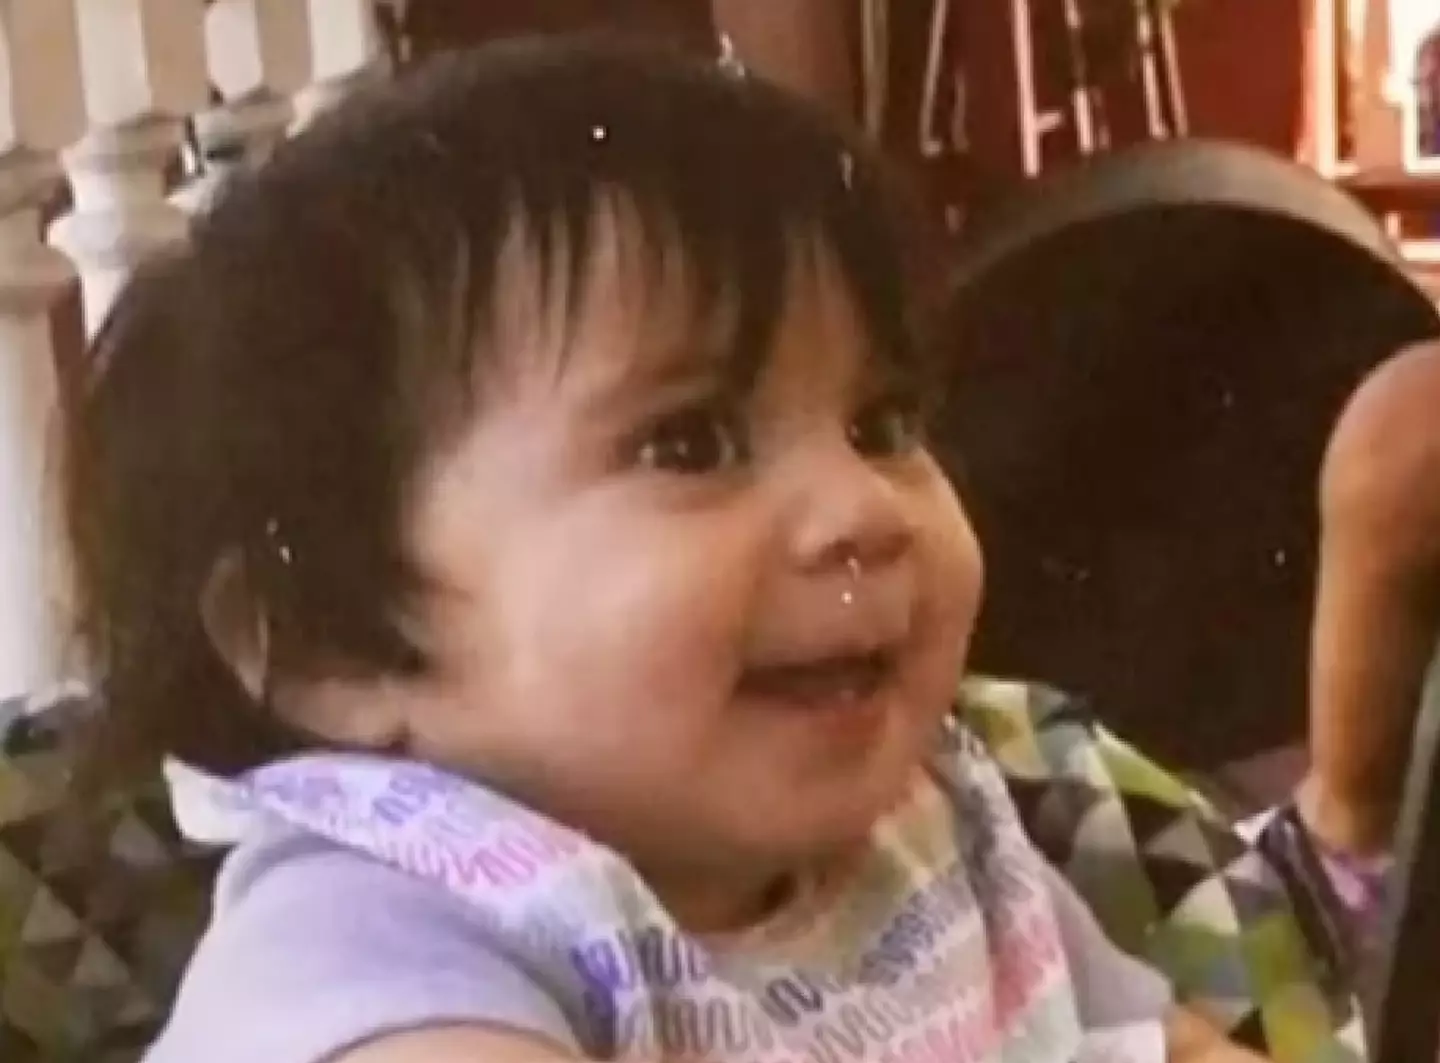 The 16-month-old baby was found dead after her mother came home after 10 days.